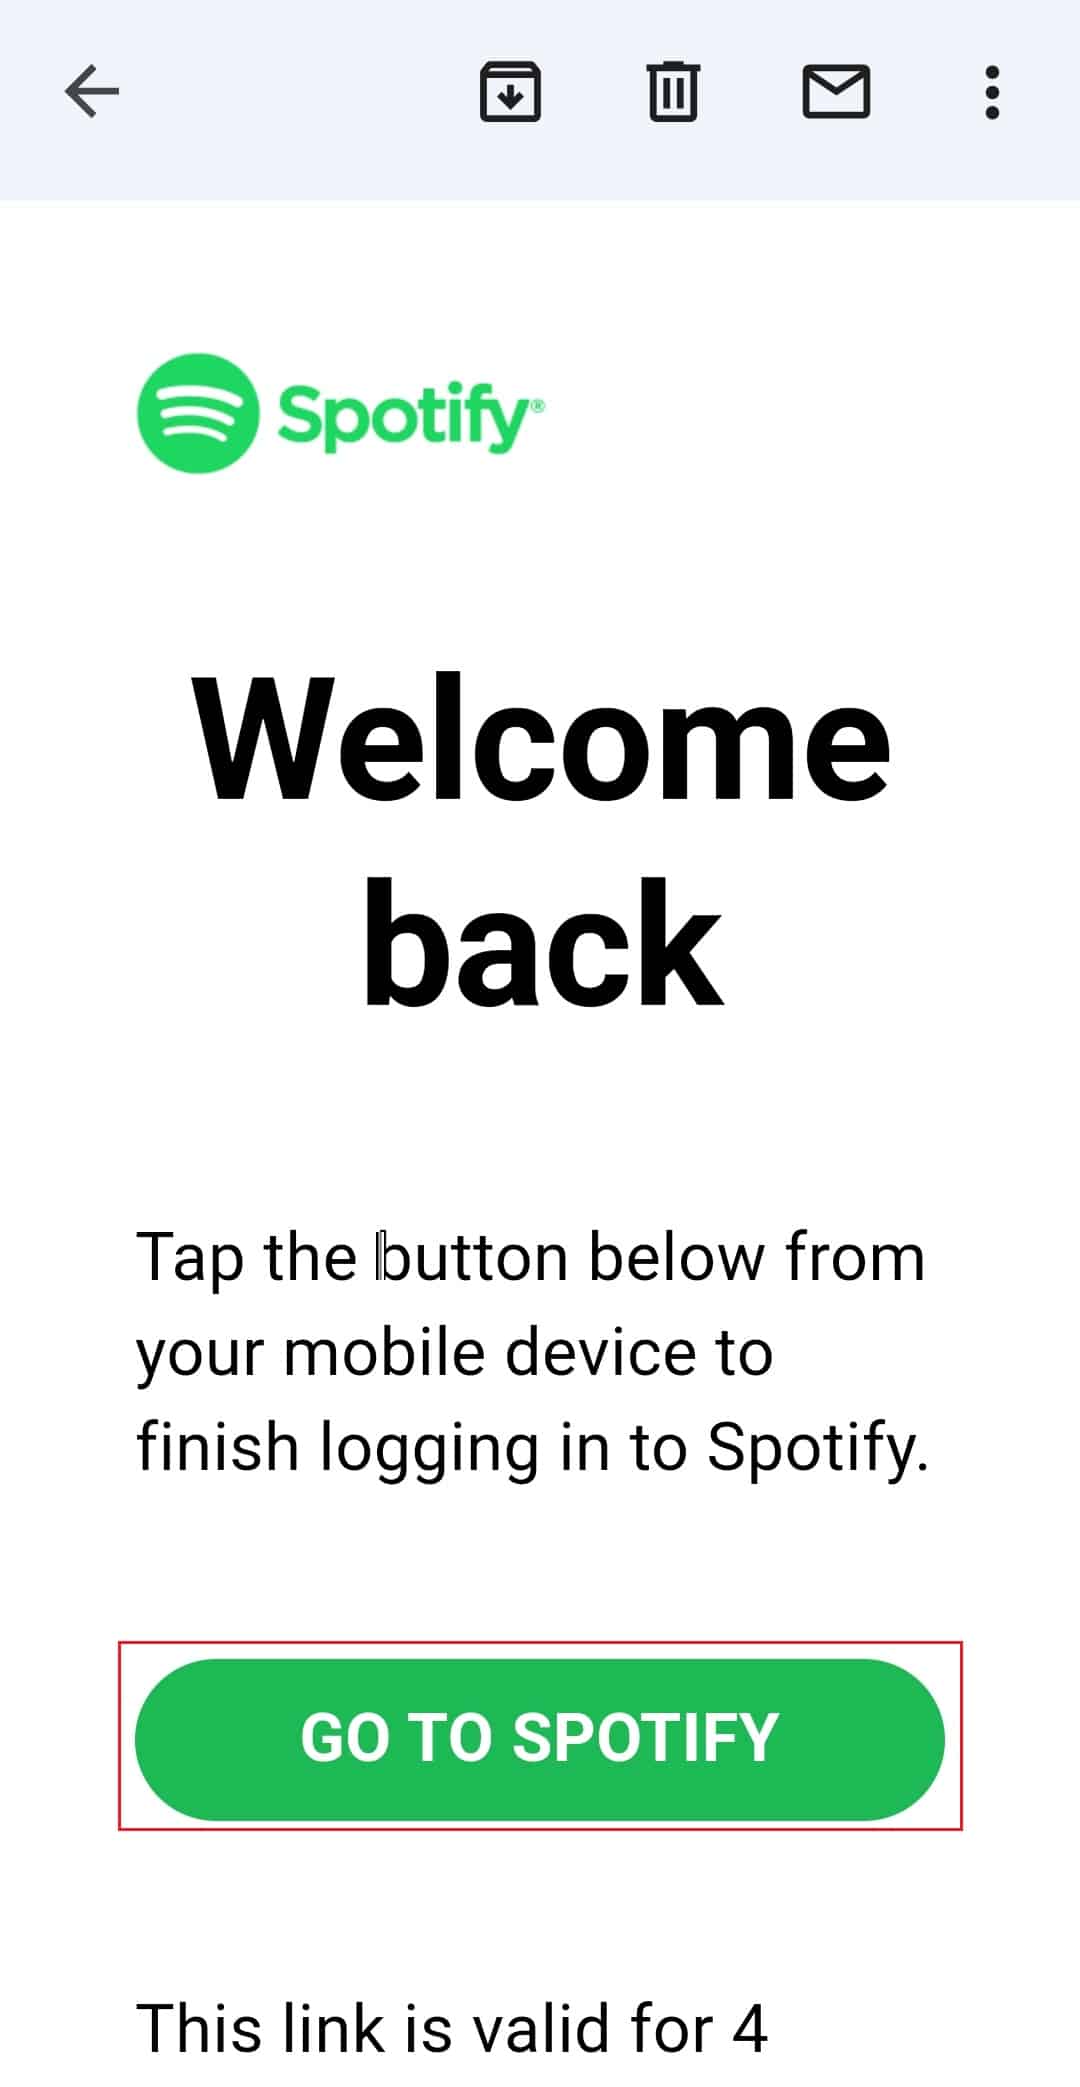 Go to Spotify in gmail app